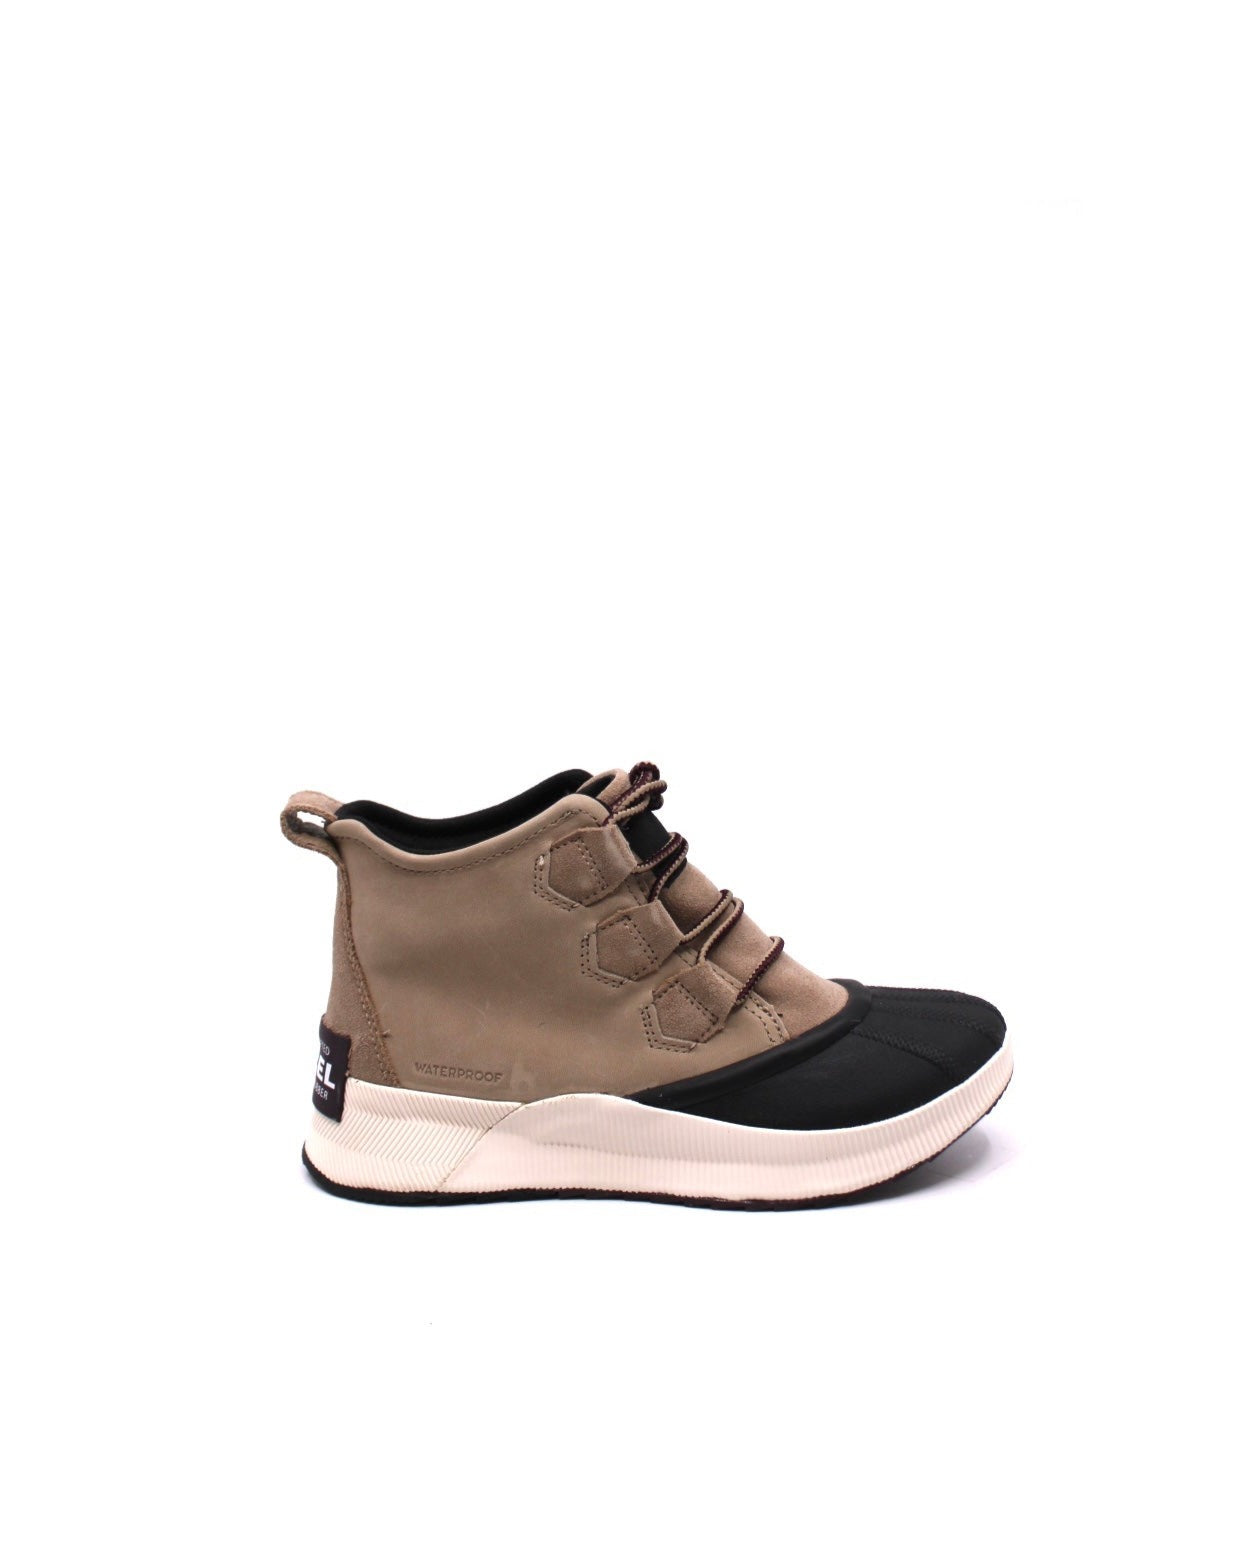 Sorel, Sorel Out 'N About III Classic Omega Taupe/Nero